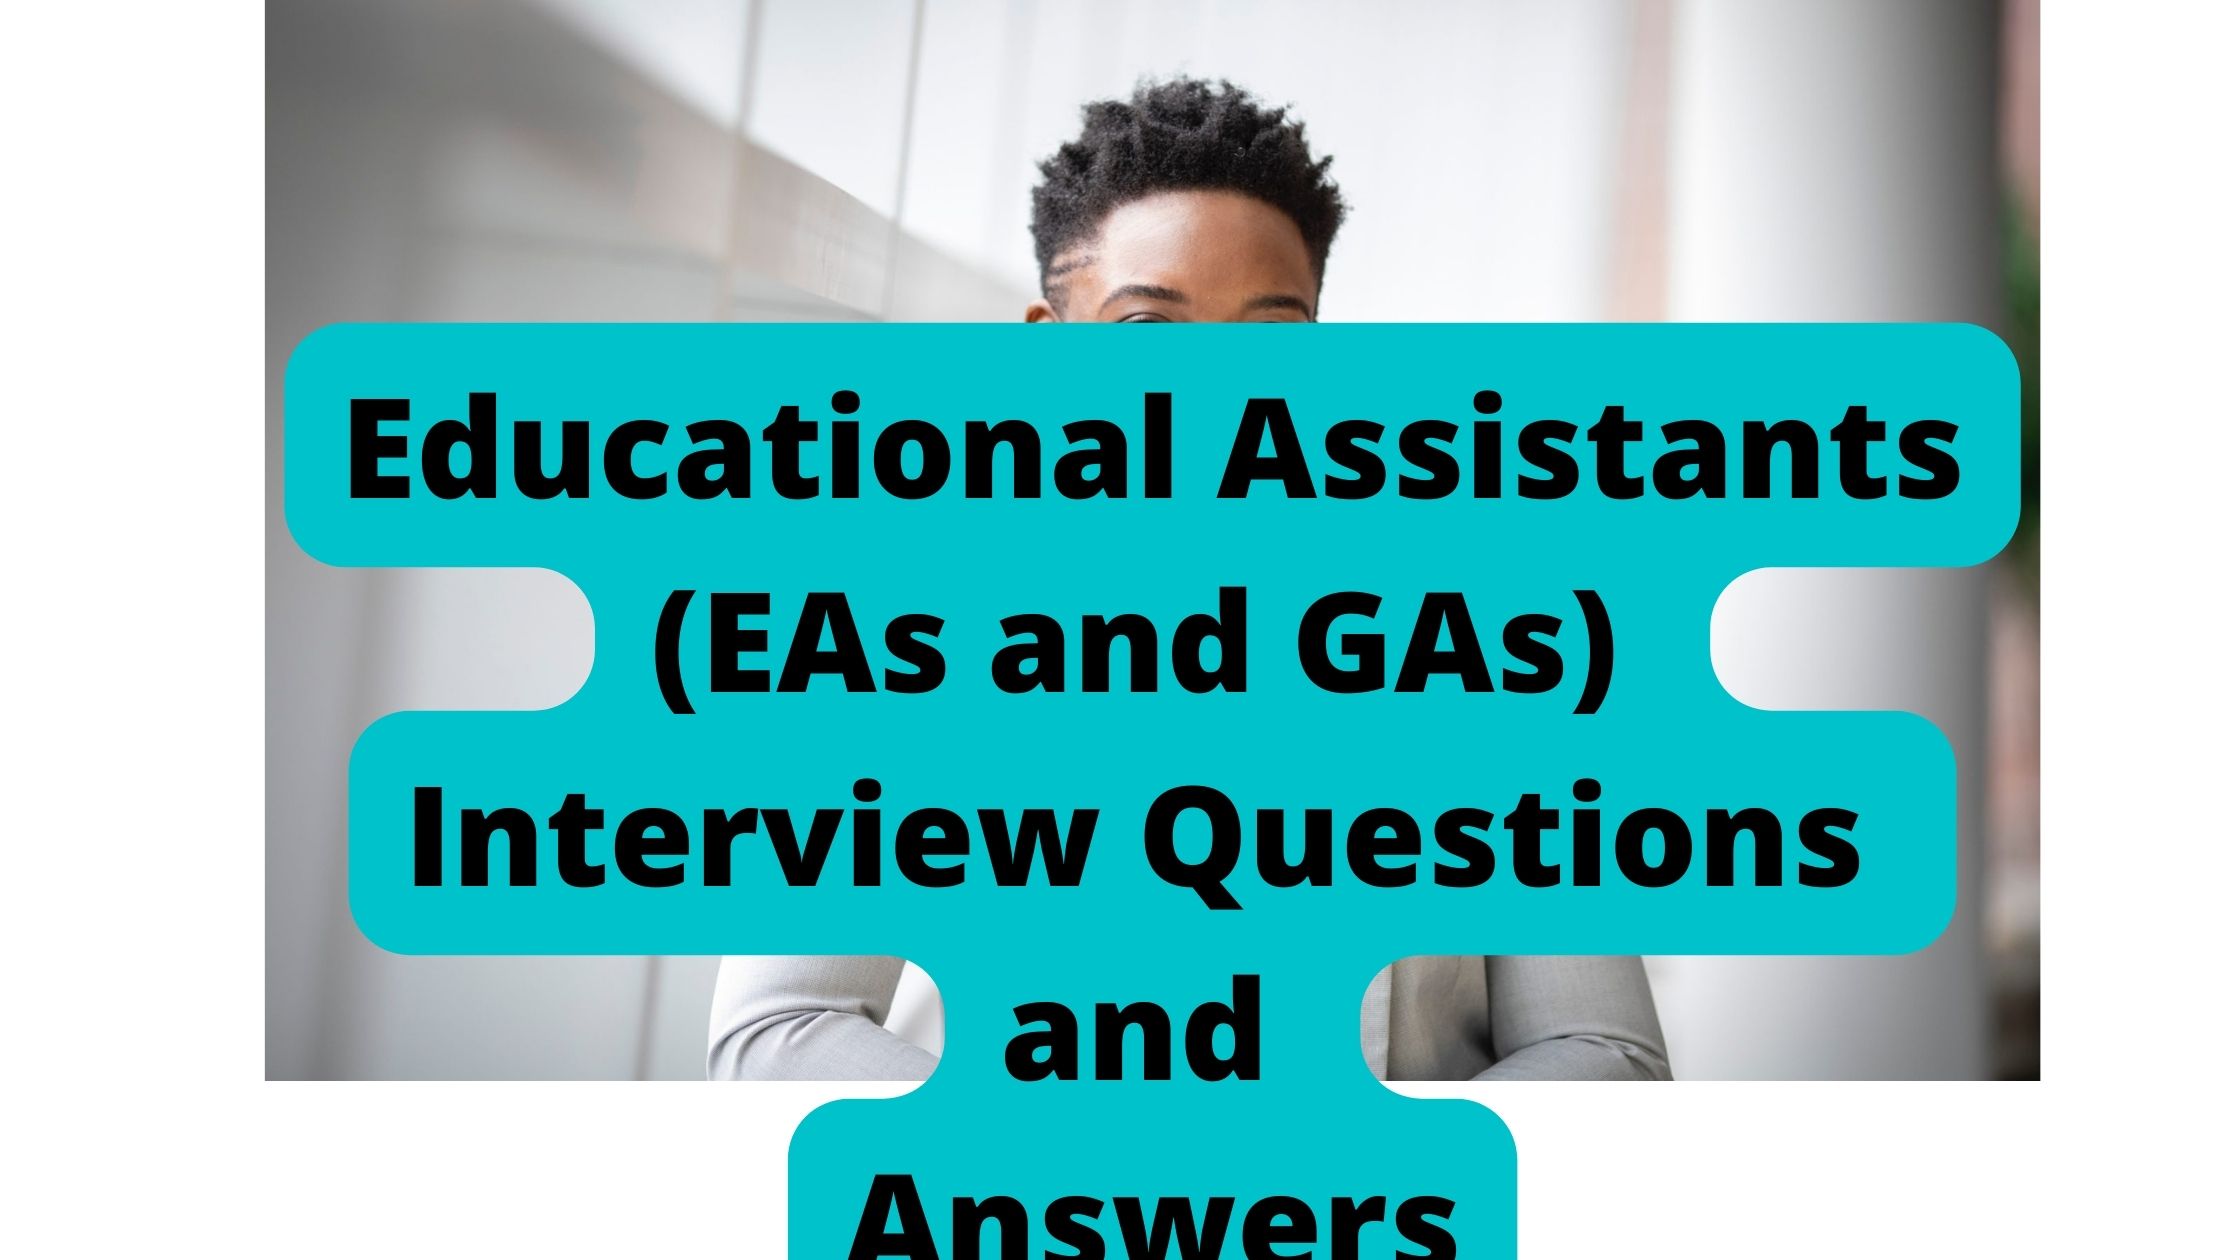 Educational Assistants (EAs and GAs) Interview Questions and Answers